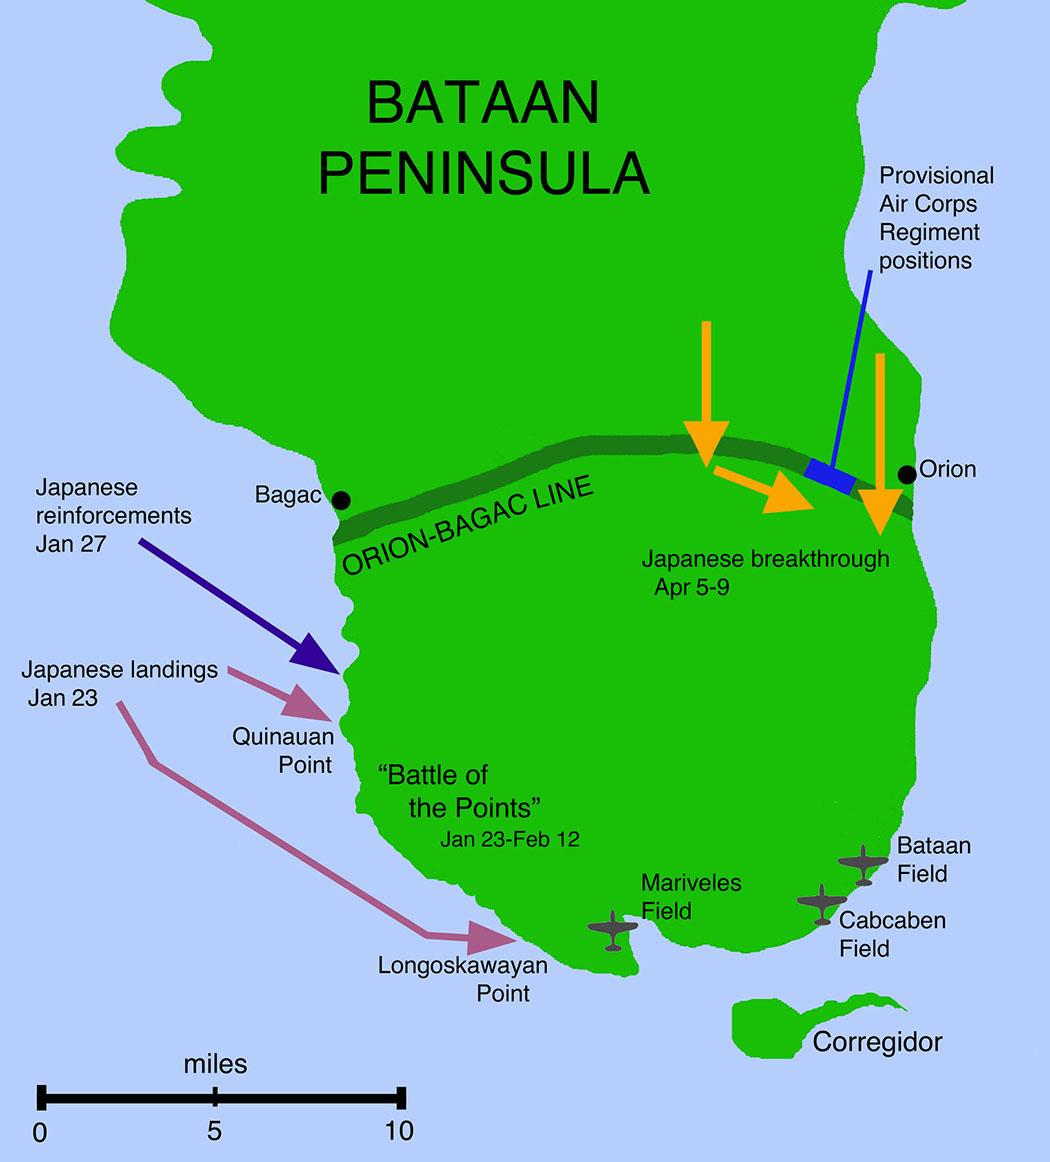 Map of WWII - Philippines, Bataan Peninsula. Illustrating: Battle of the Points January 23-February 12, 1942